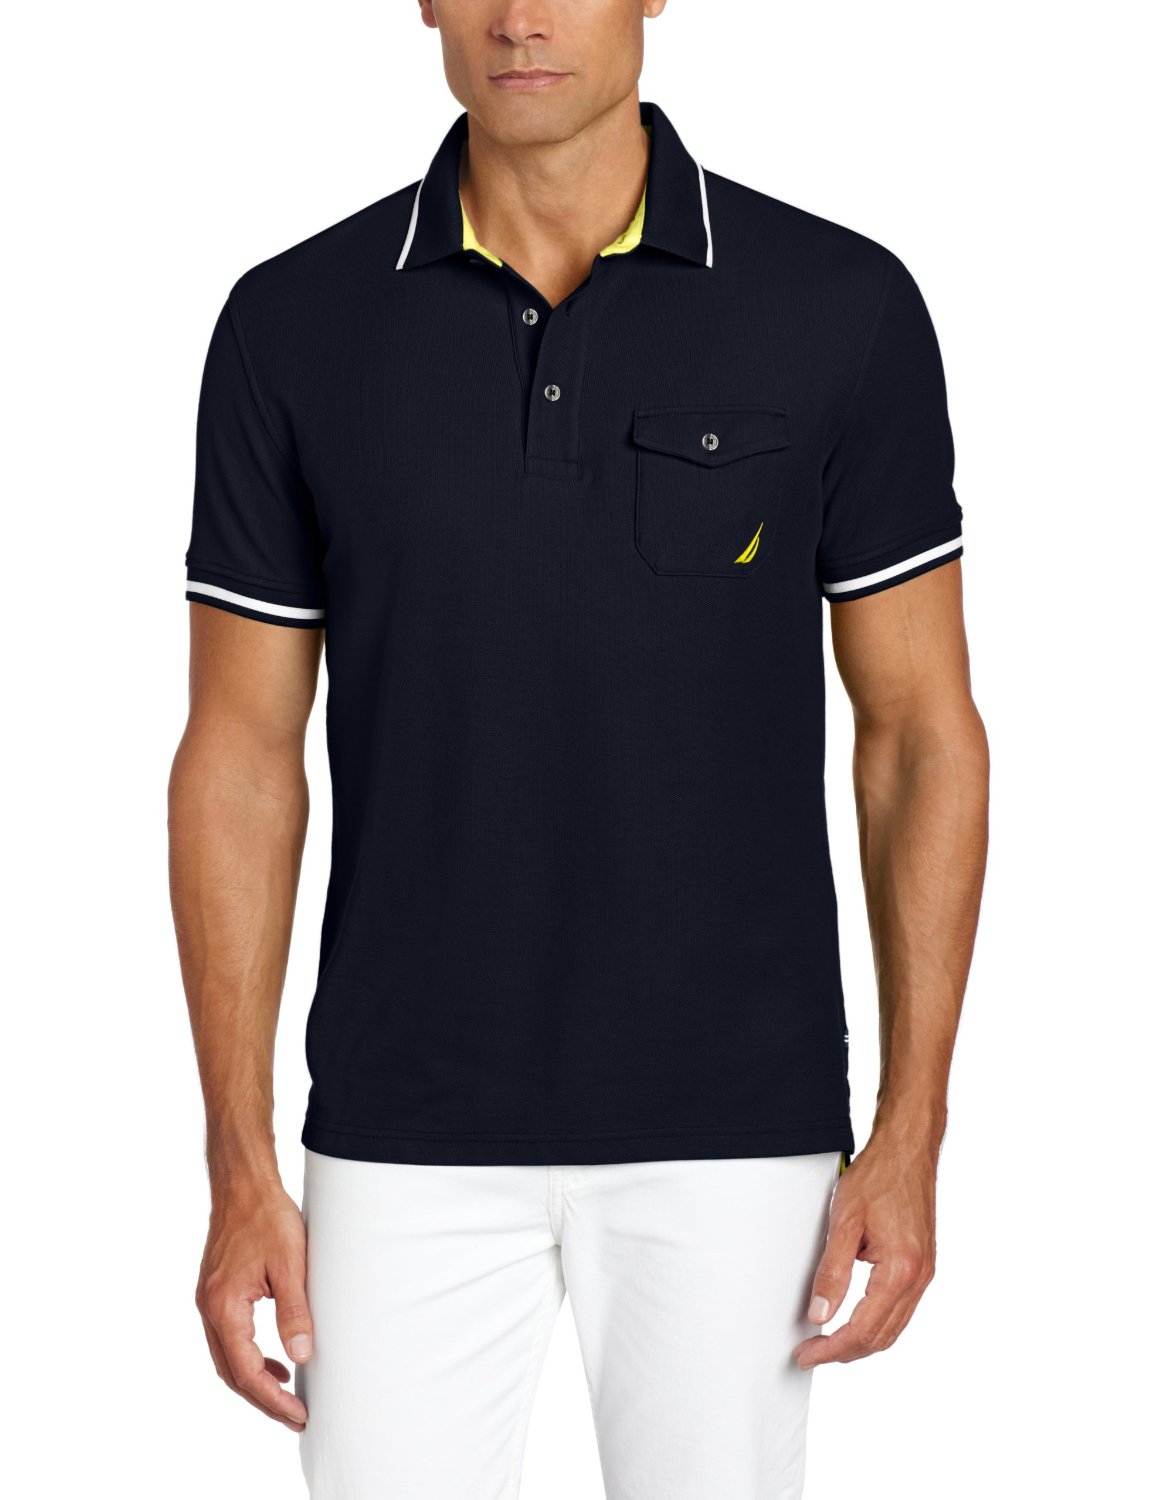 Classy menswear Classy polo  shirts  for office